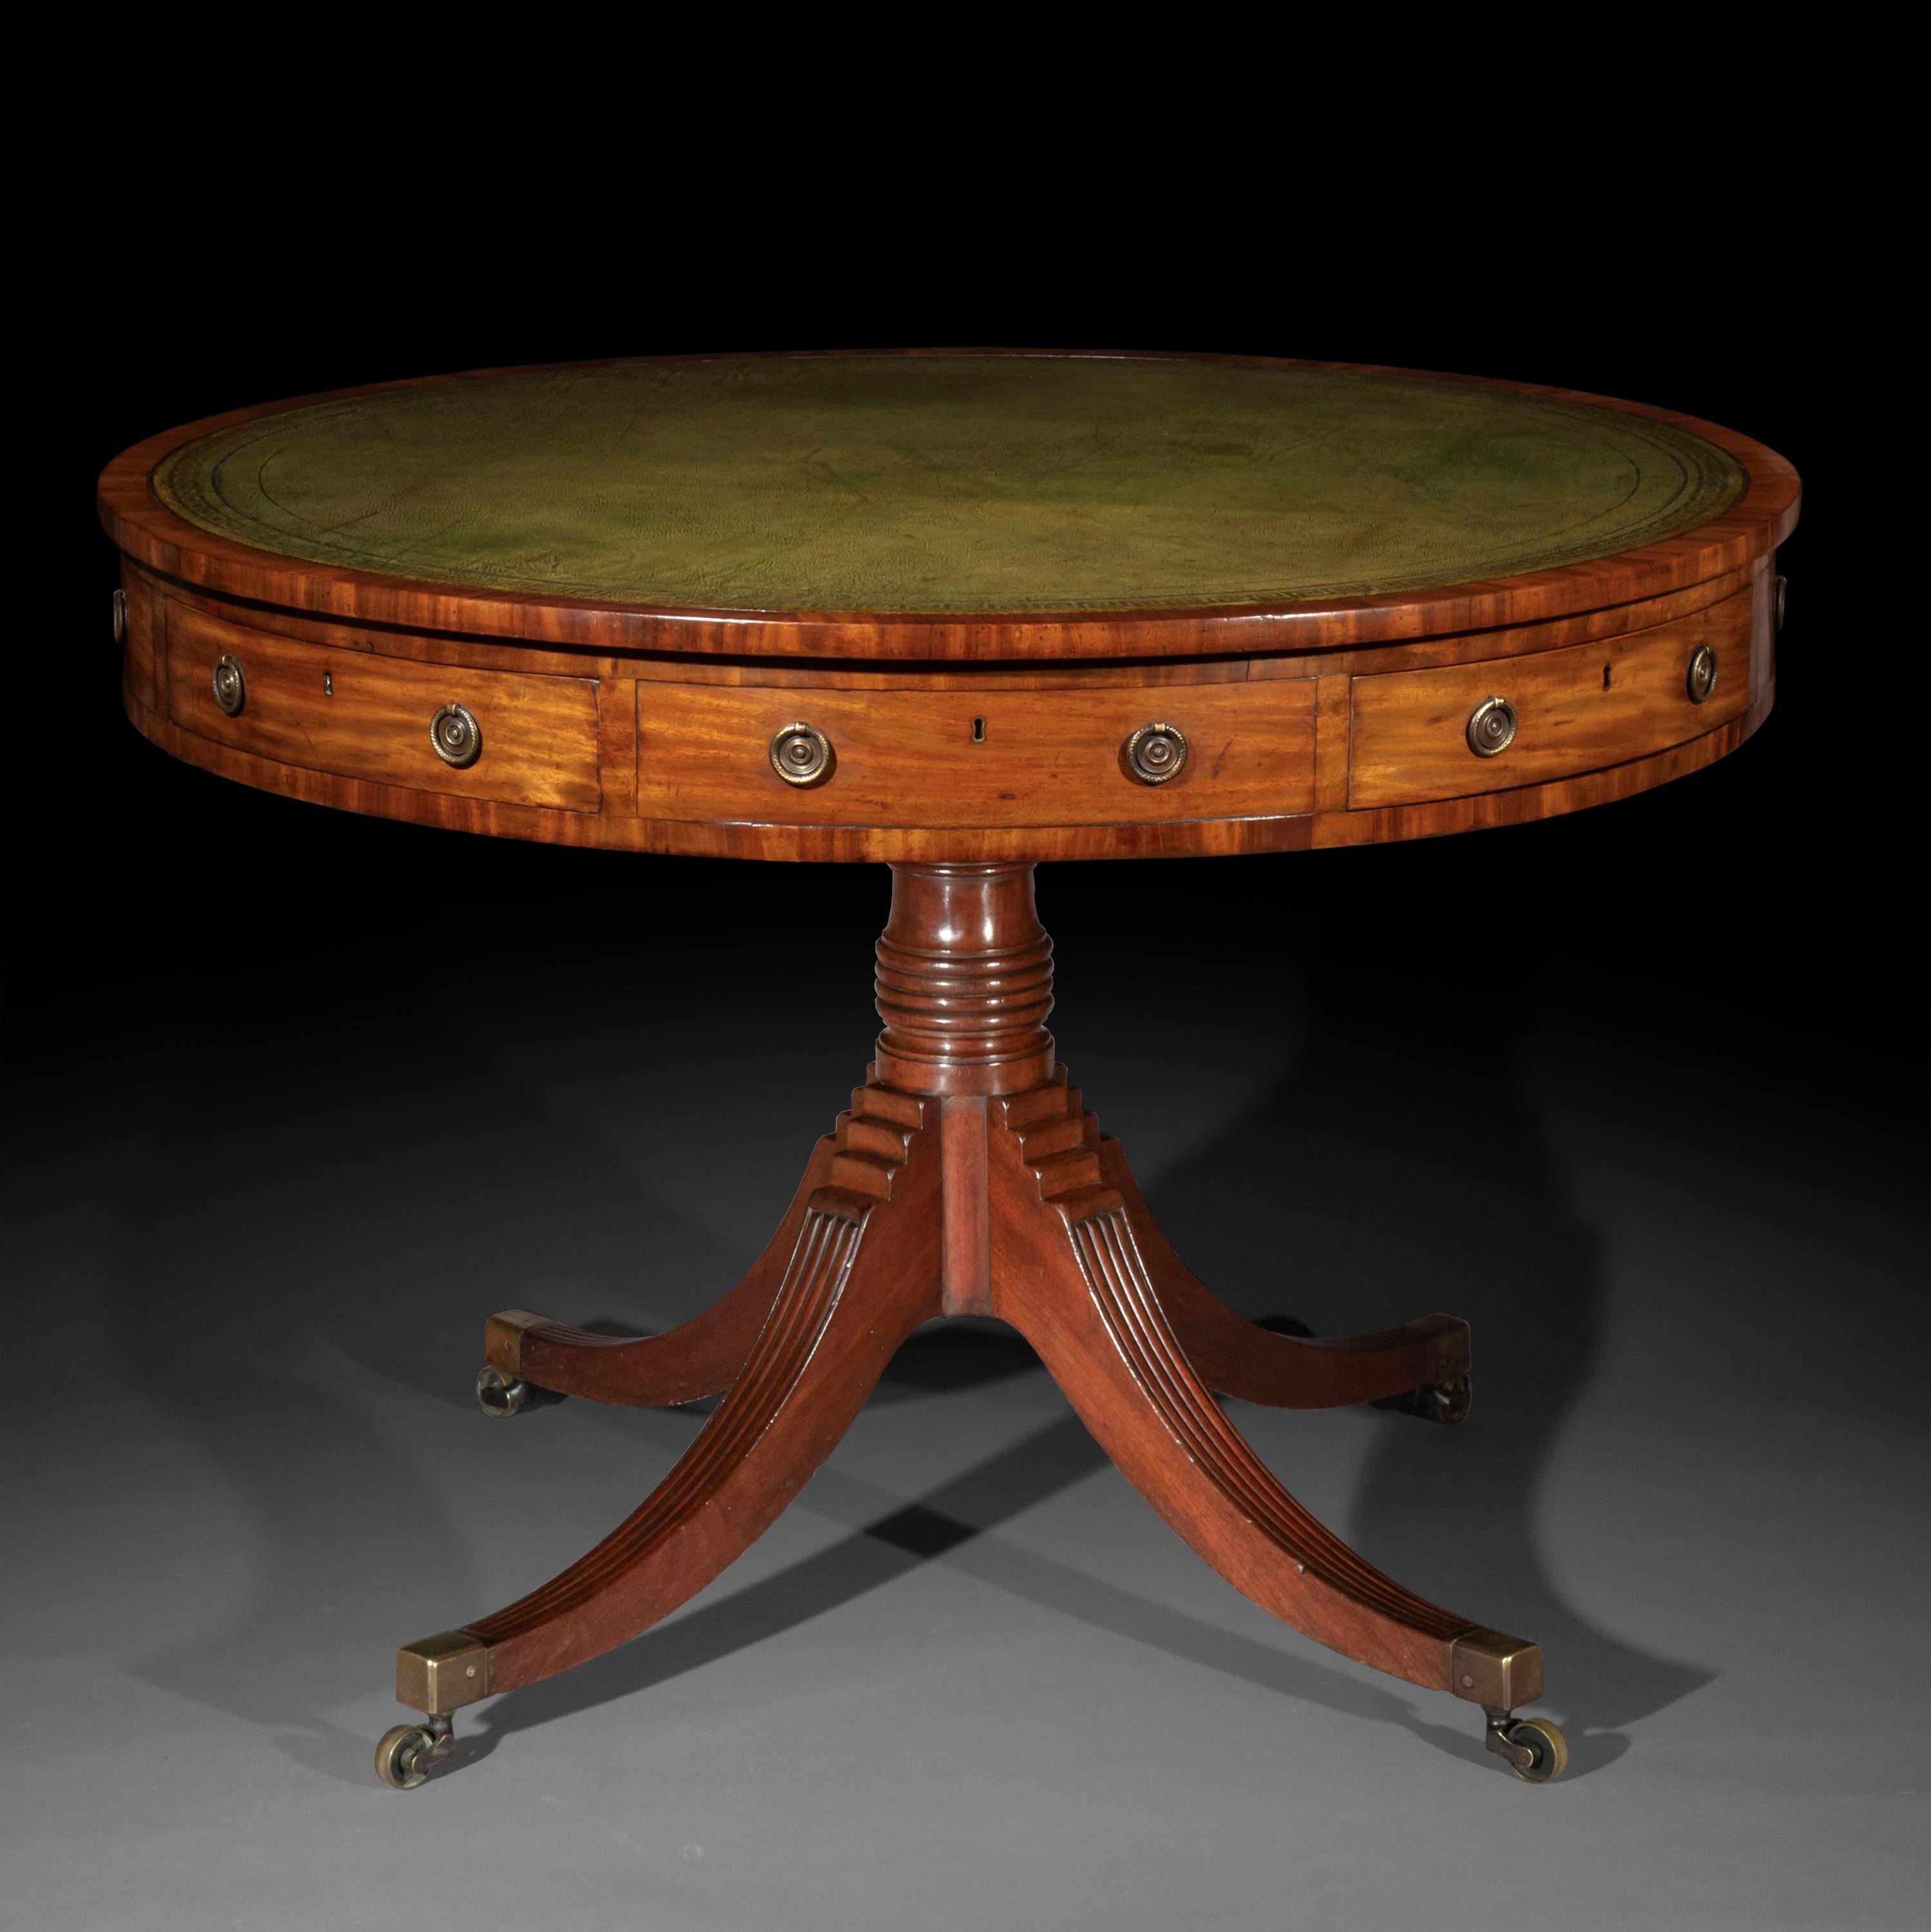 Hand-Carved Georgian Regency Library Drum Table with Green Leather Top and Greek Key Border